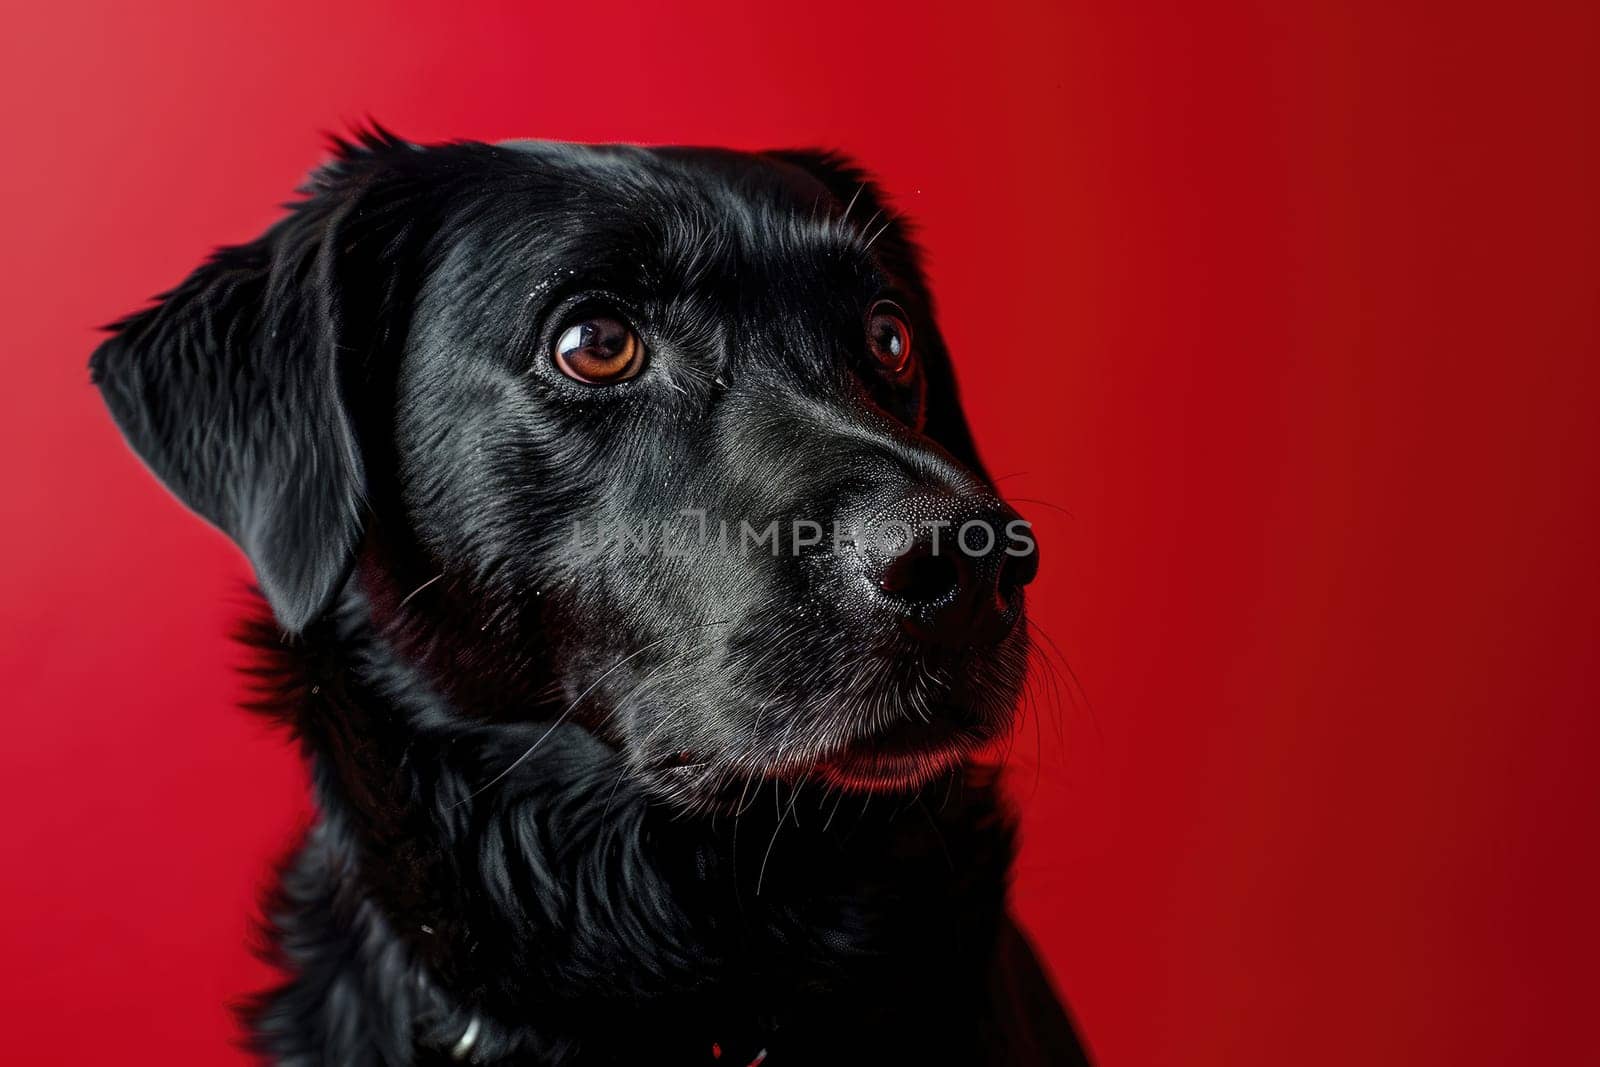 a black dog on a red background, Black and red.